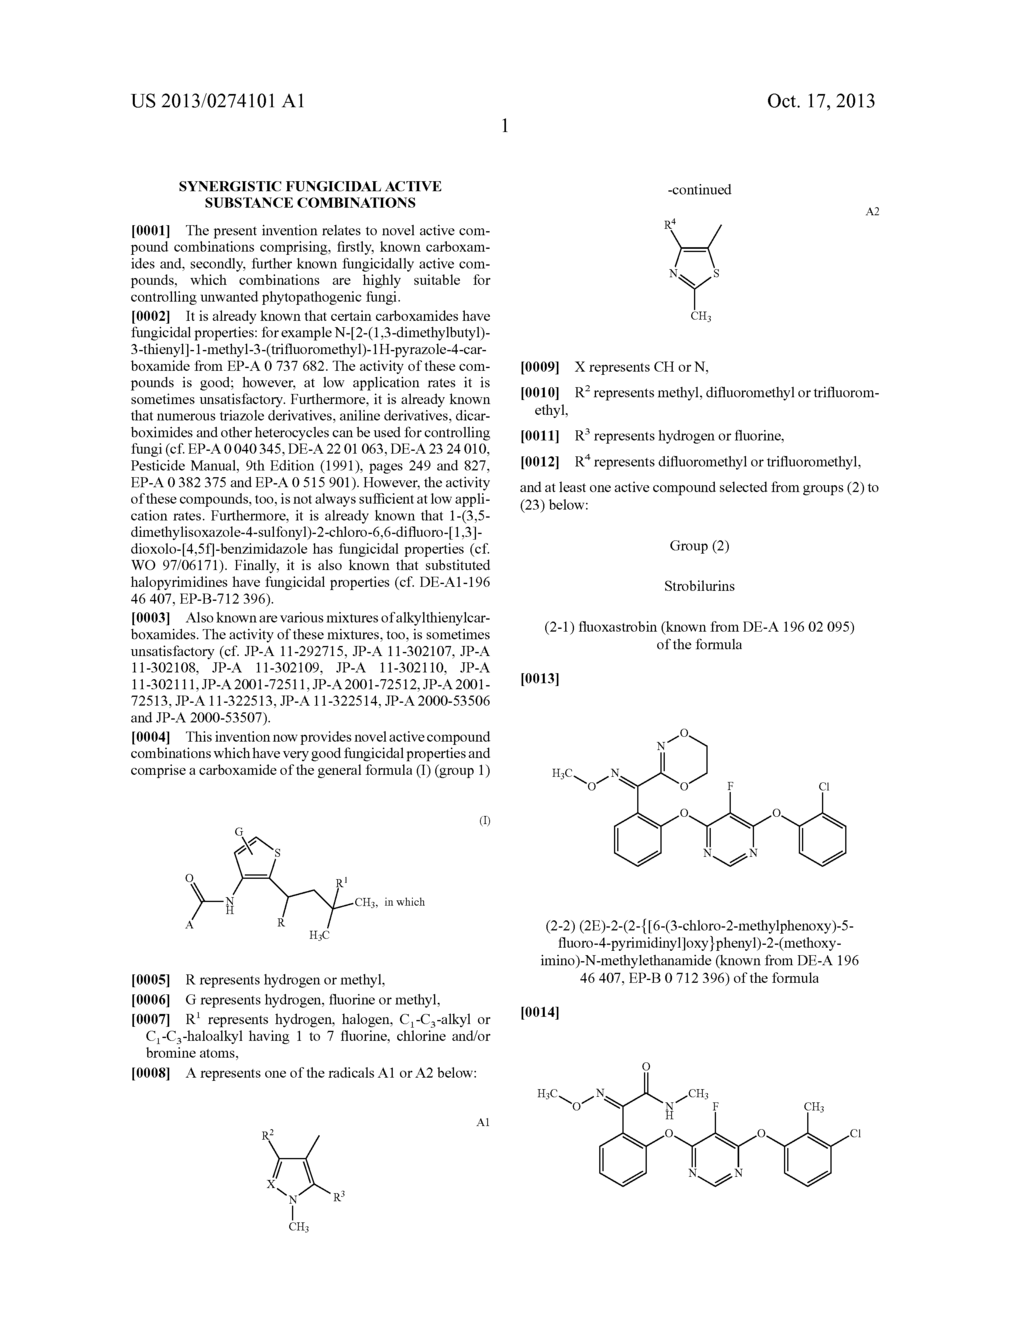 Synergistic Fungicidal Active Substance Combinations - diagram, schematic, and image 02